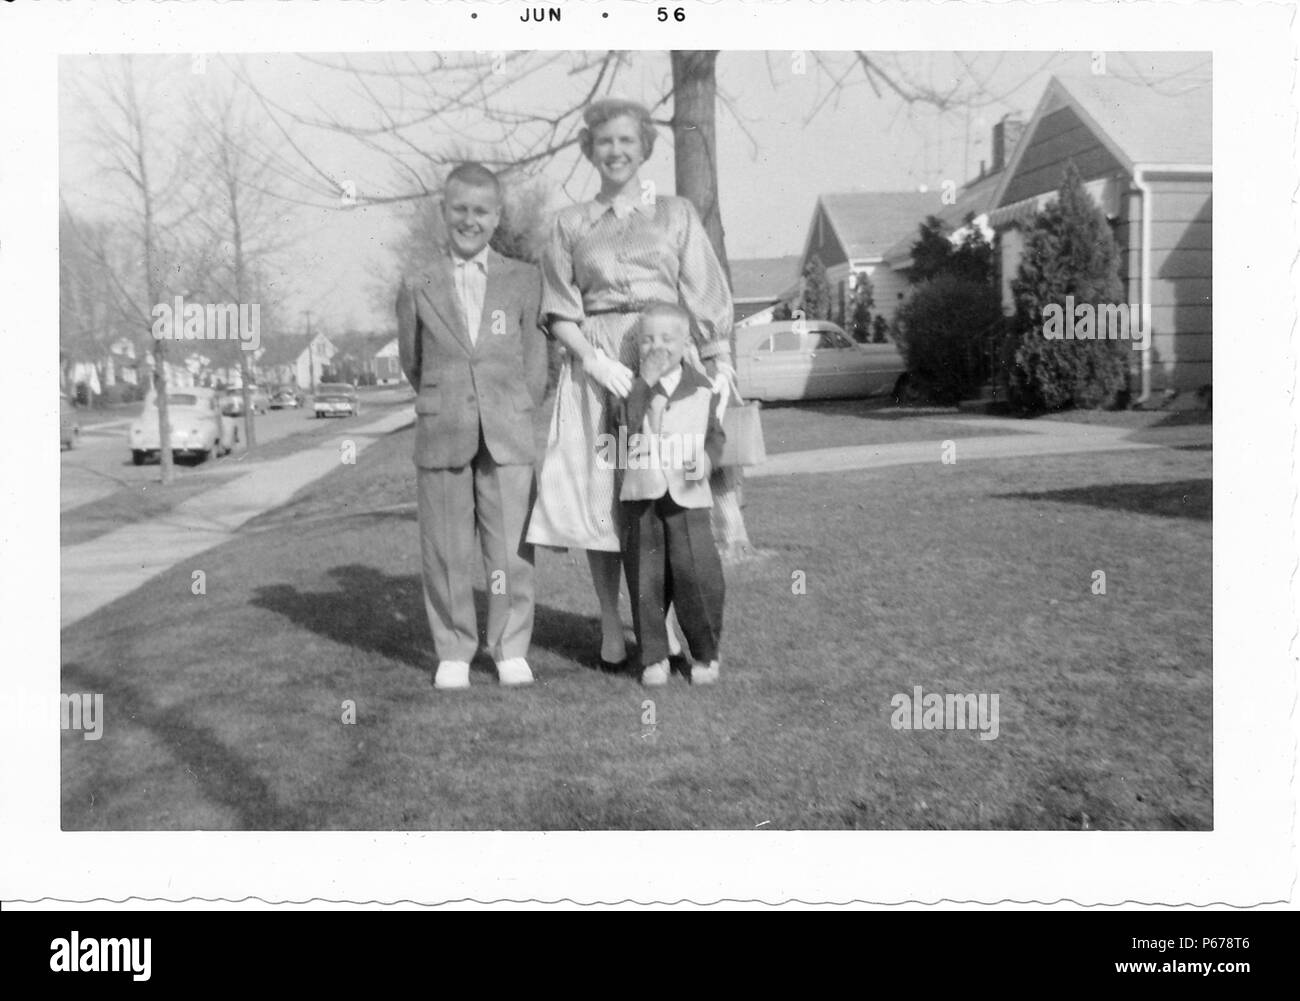 Black and white photograph, showing a short-haired woman, wearing a skirt, blouse, and gloves, posing with two young boys, both wearing suits, the smaller one wearing a two-toned jacket, with trees, vintage cars, and suburban houses visible in the background, likely photographed in Ohio, June, 1956. () Stock Photo